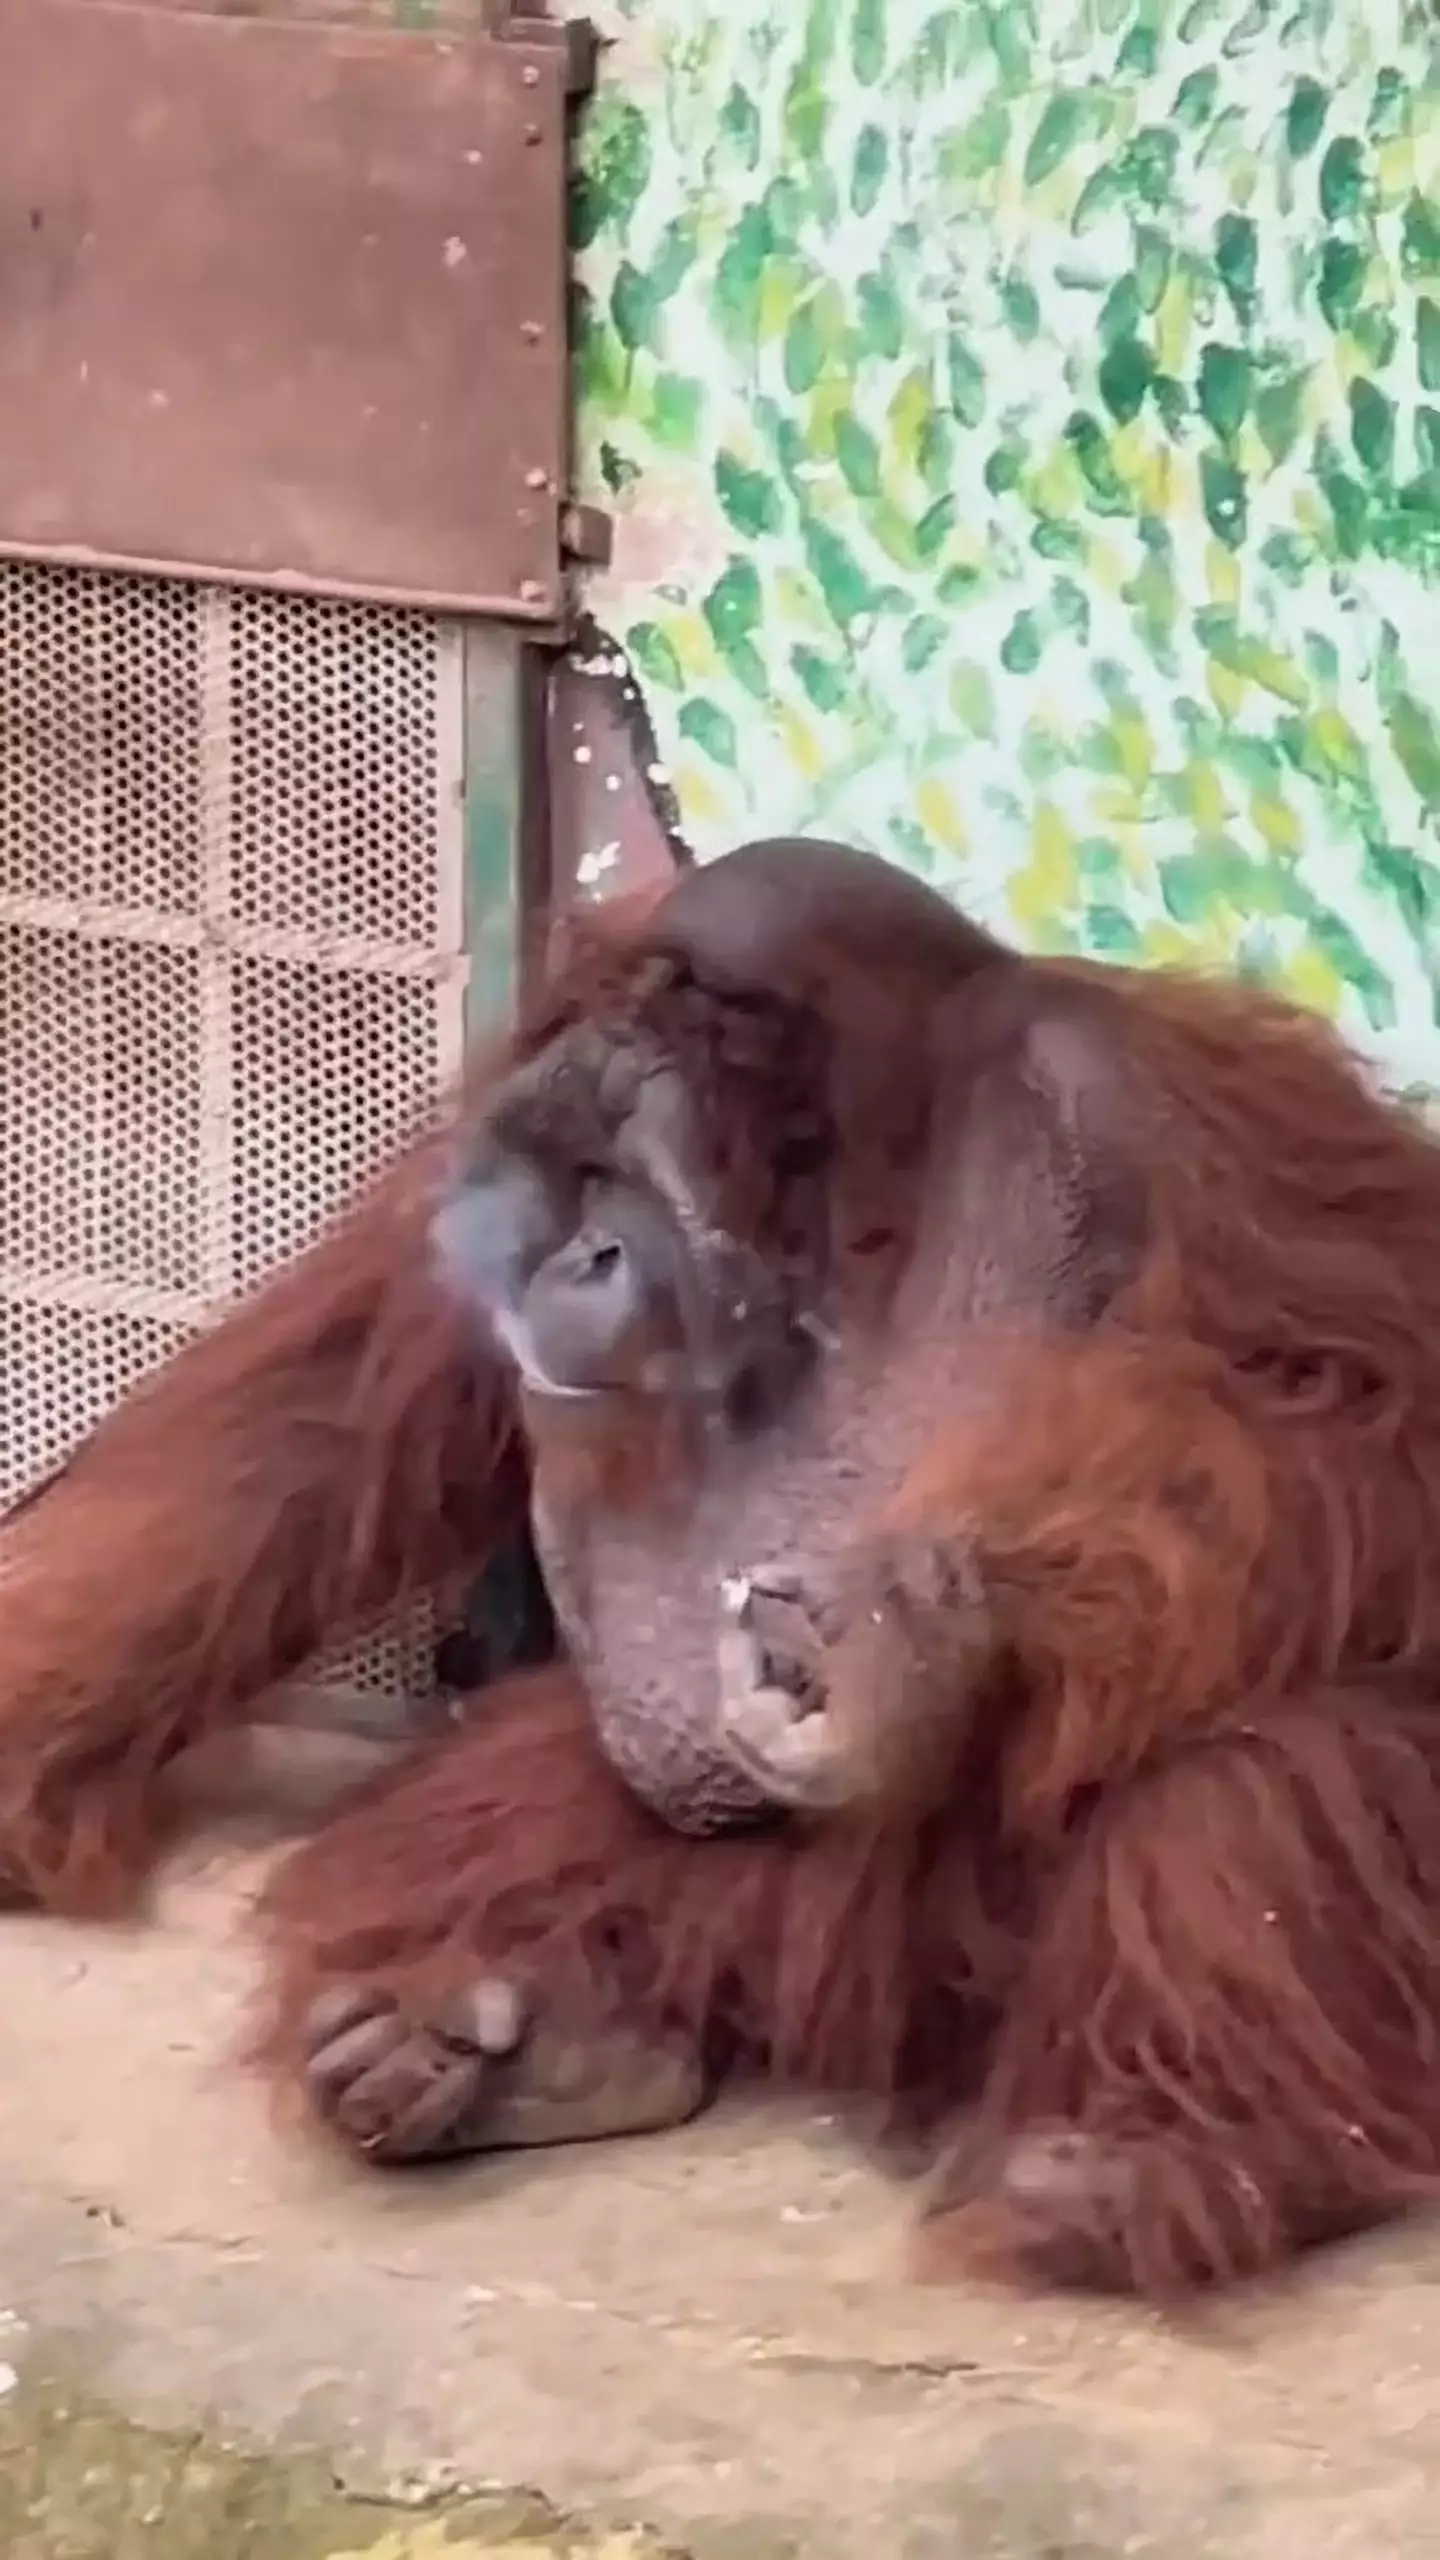 The orangutan was seen puffing on the cigarette as a human would.